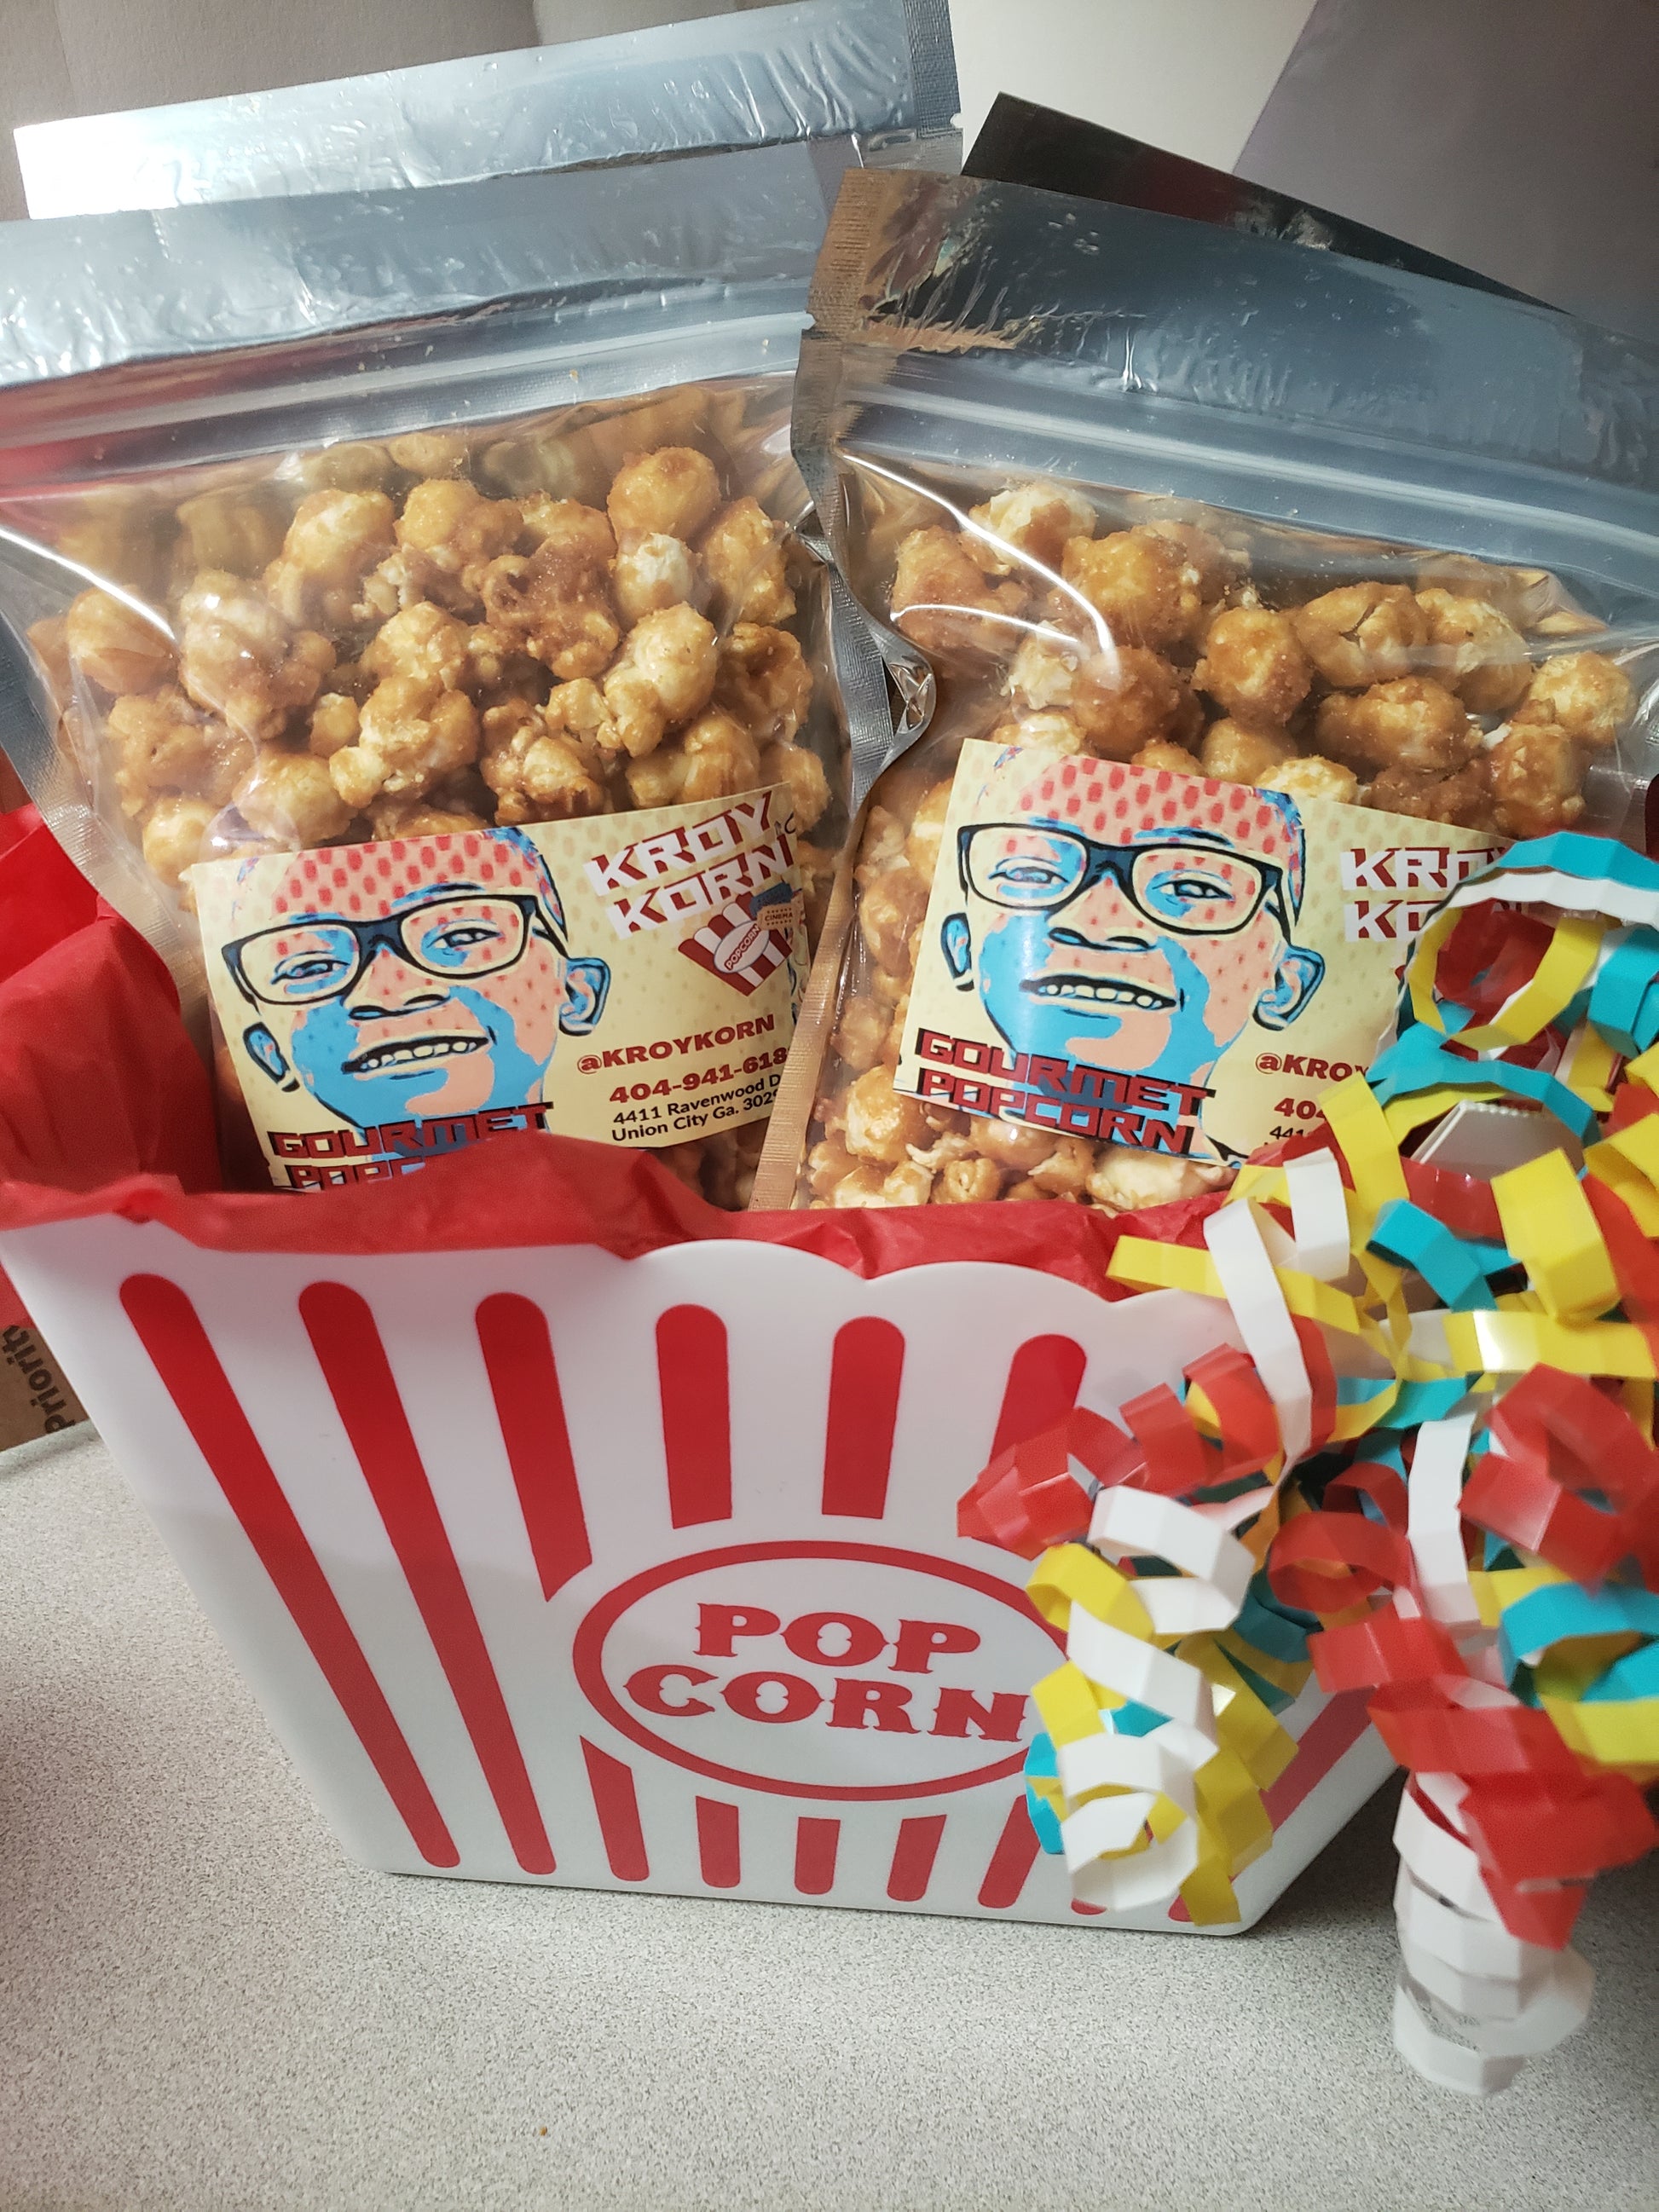 Party Korn Variety Pack at $39.99 only from Kroy Korn Gourmet Popcorn